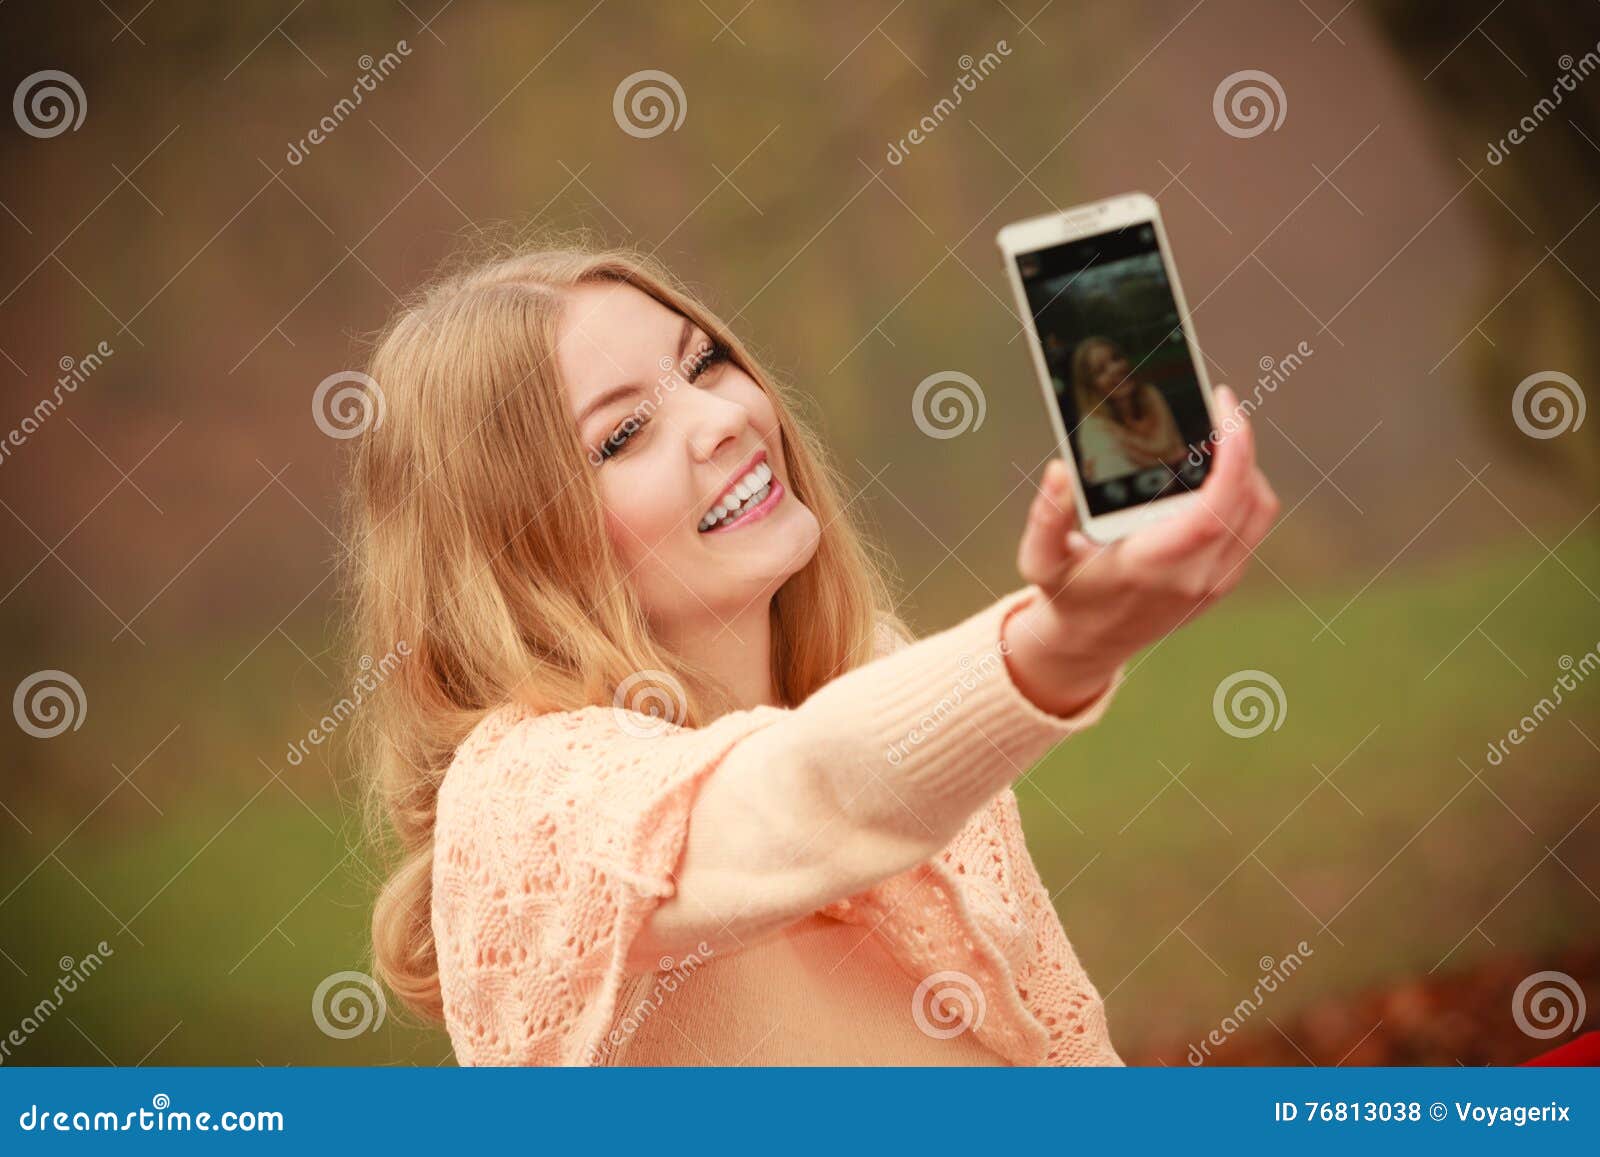 Blonde girl taking a selfie with her hair down - wide 4